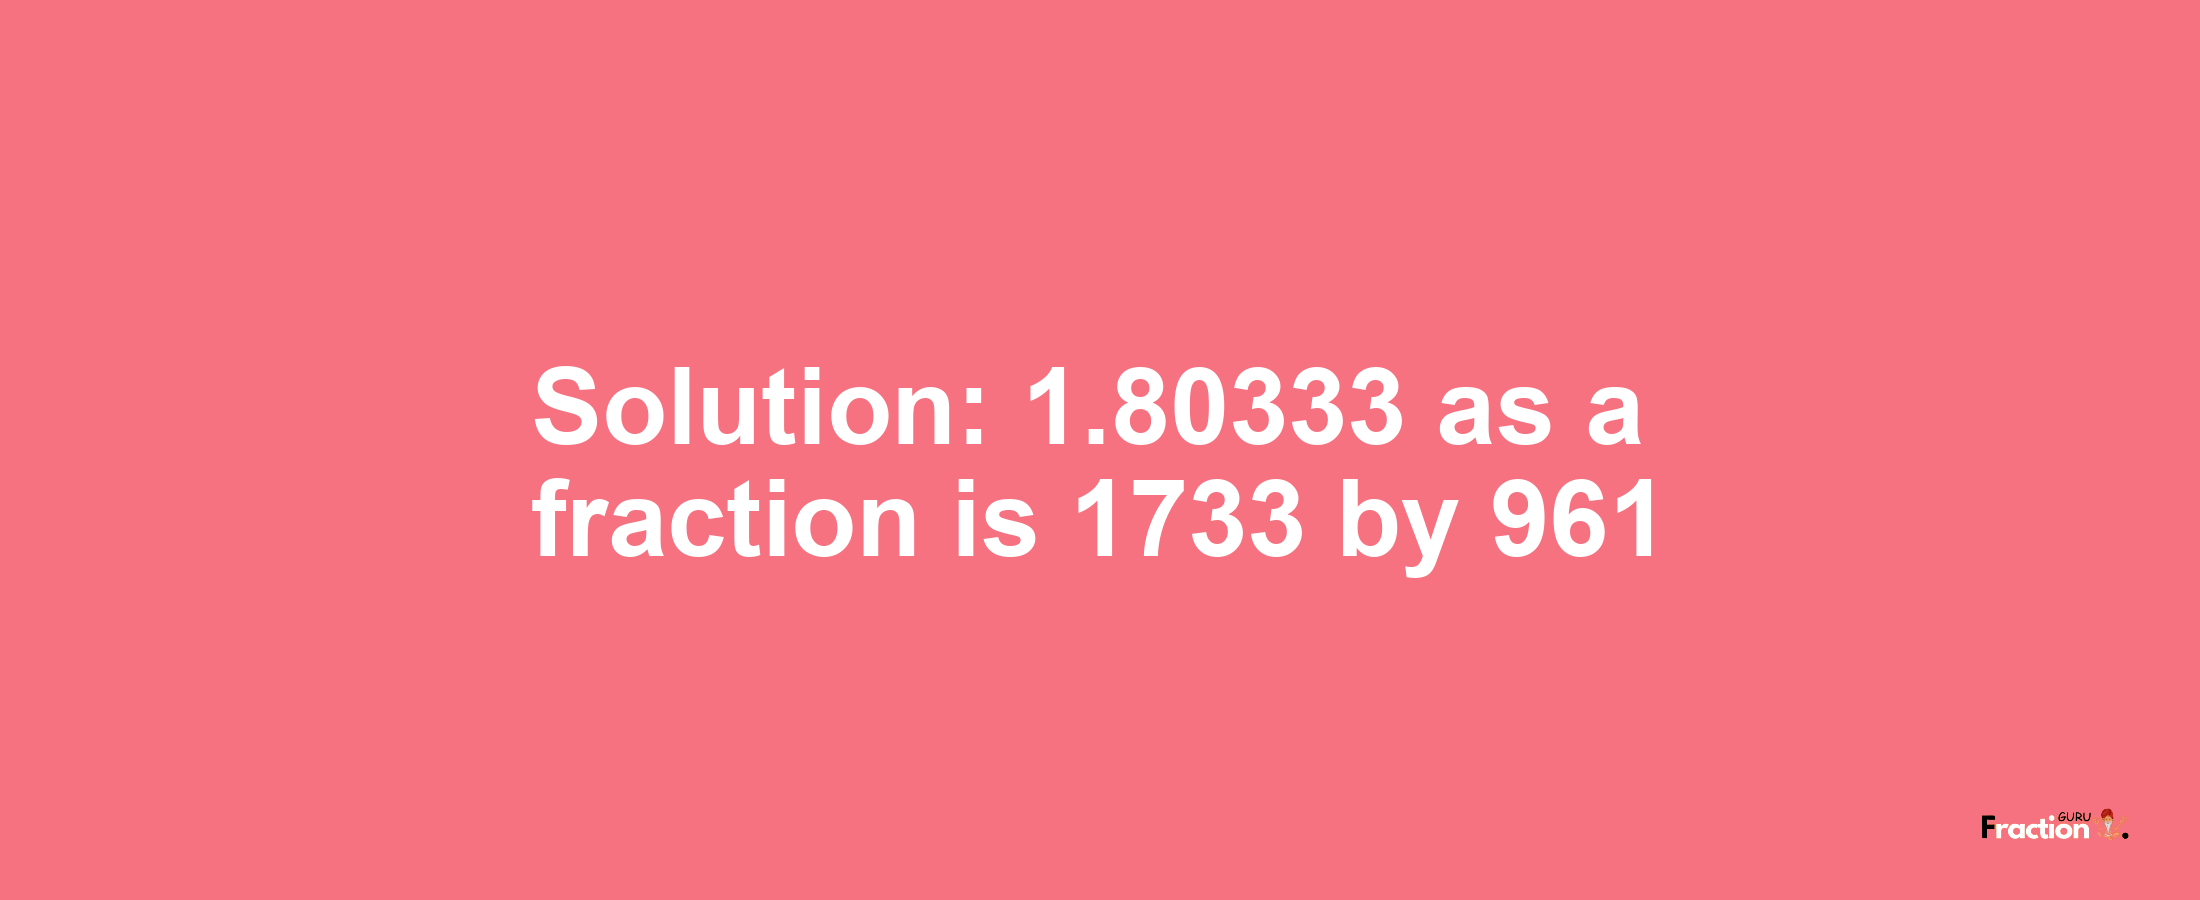 Solution:1.80333 as a fraction is 1733/961